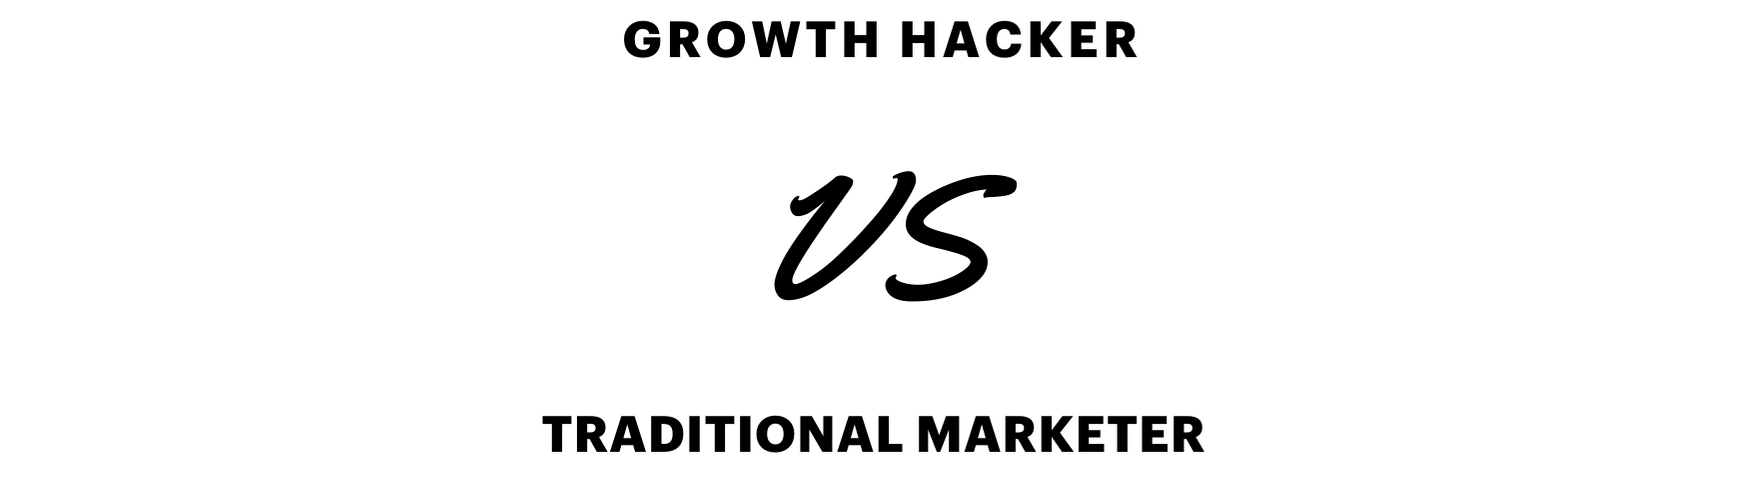 growth hacker vs traditional marketer